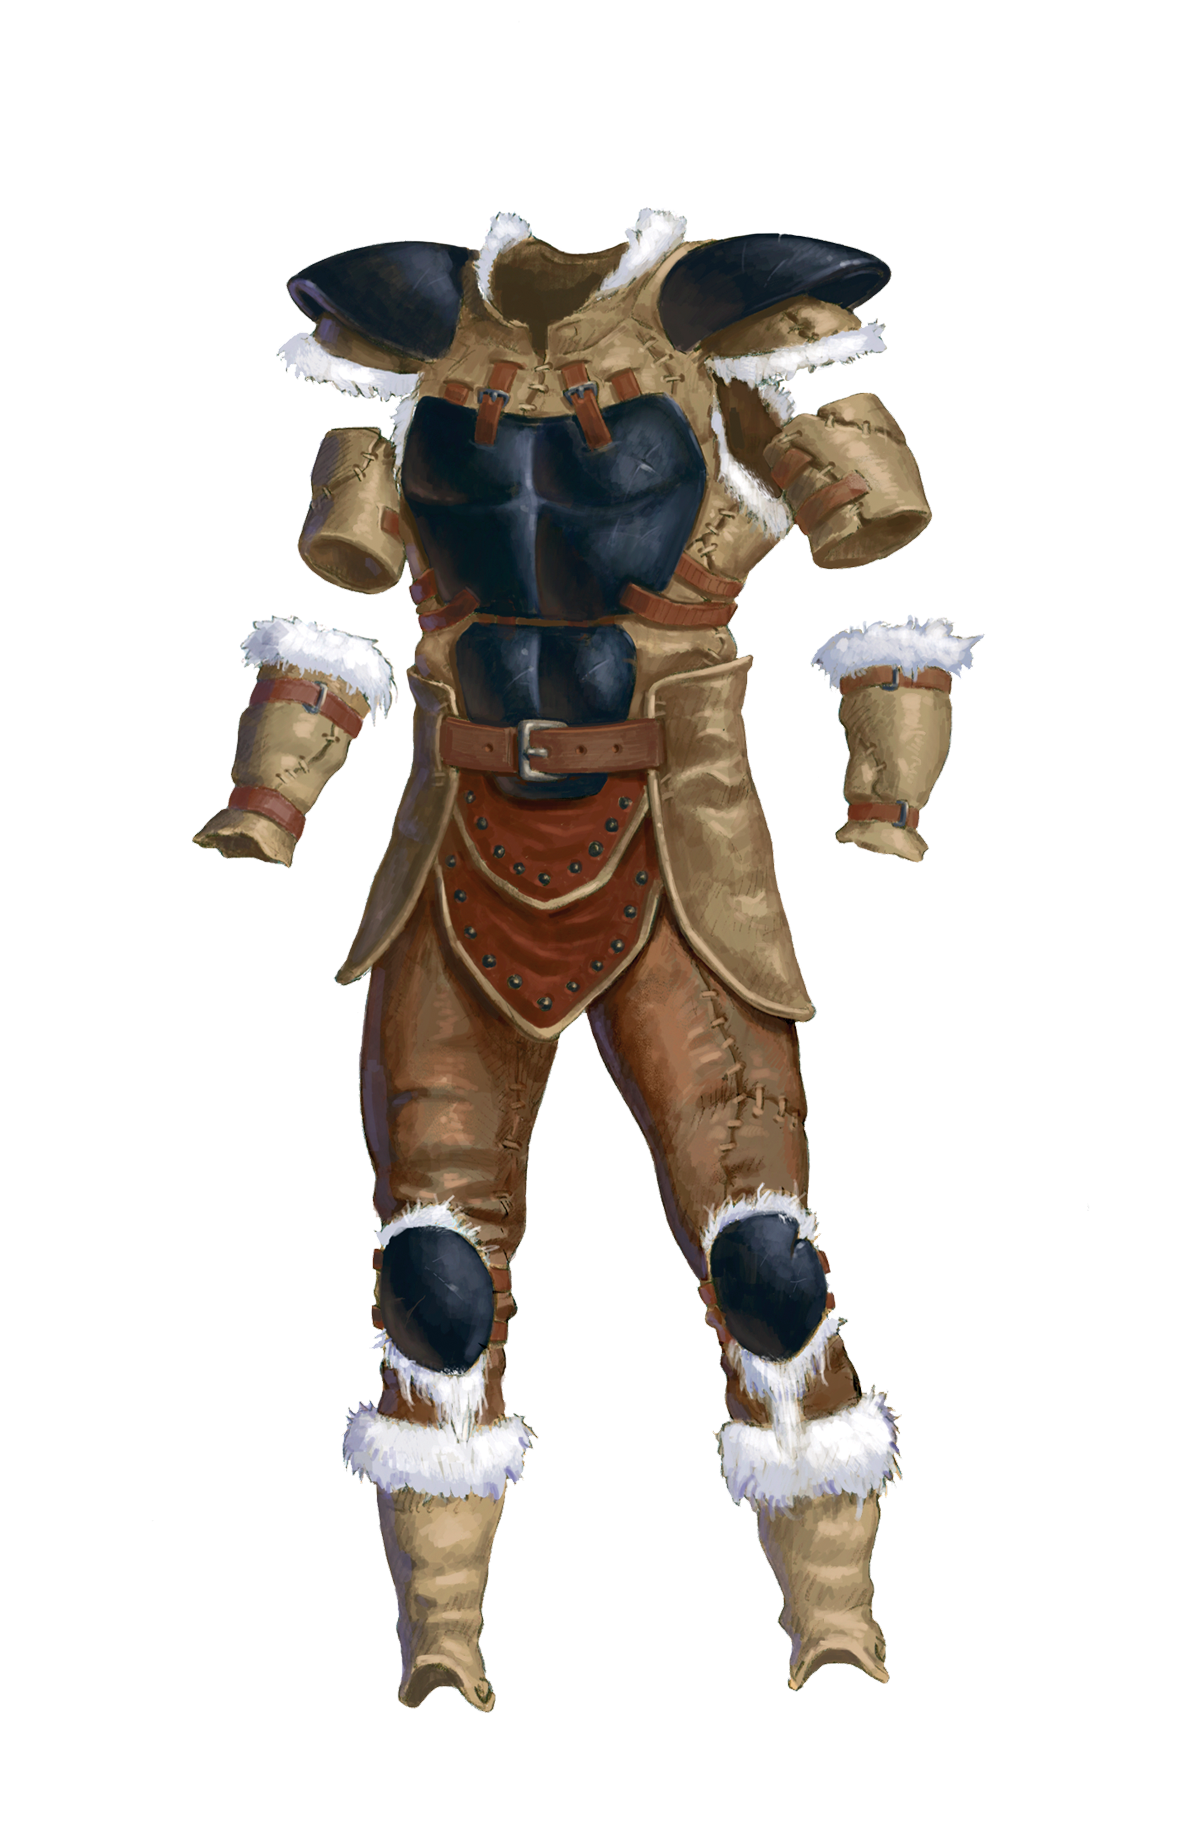 Ursikka hides armor: a light, flexible, body armor edged in white fur with a dark breastplate and knee and shoulder armor